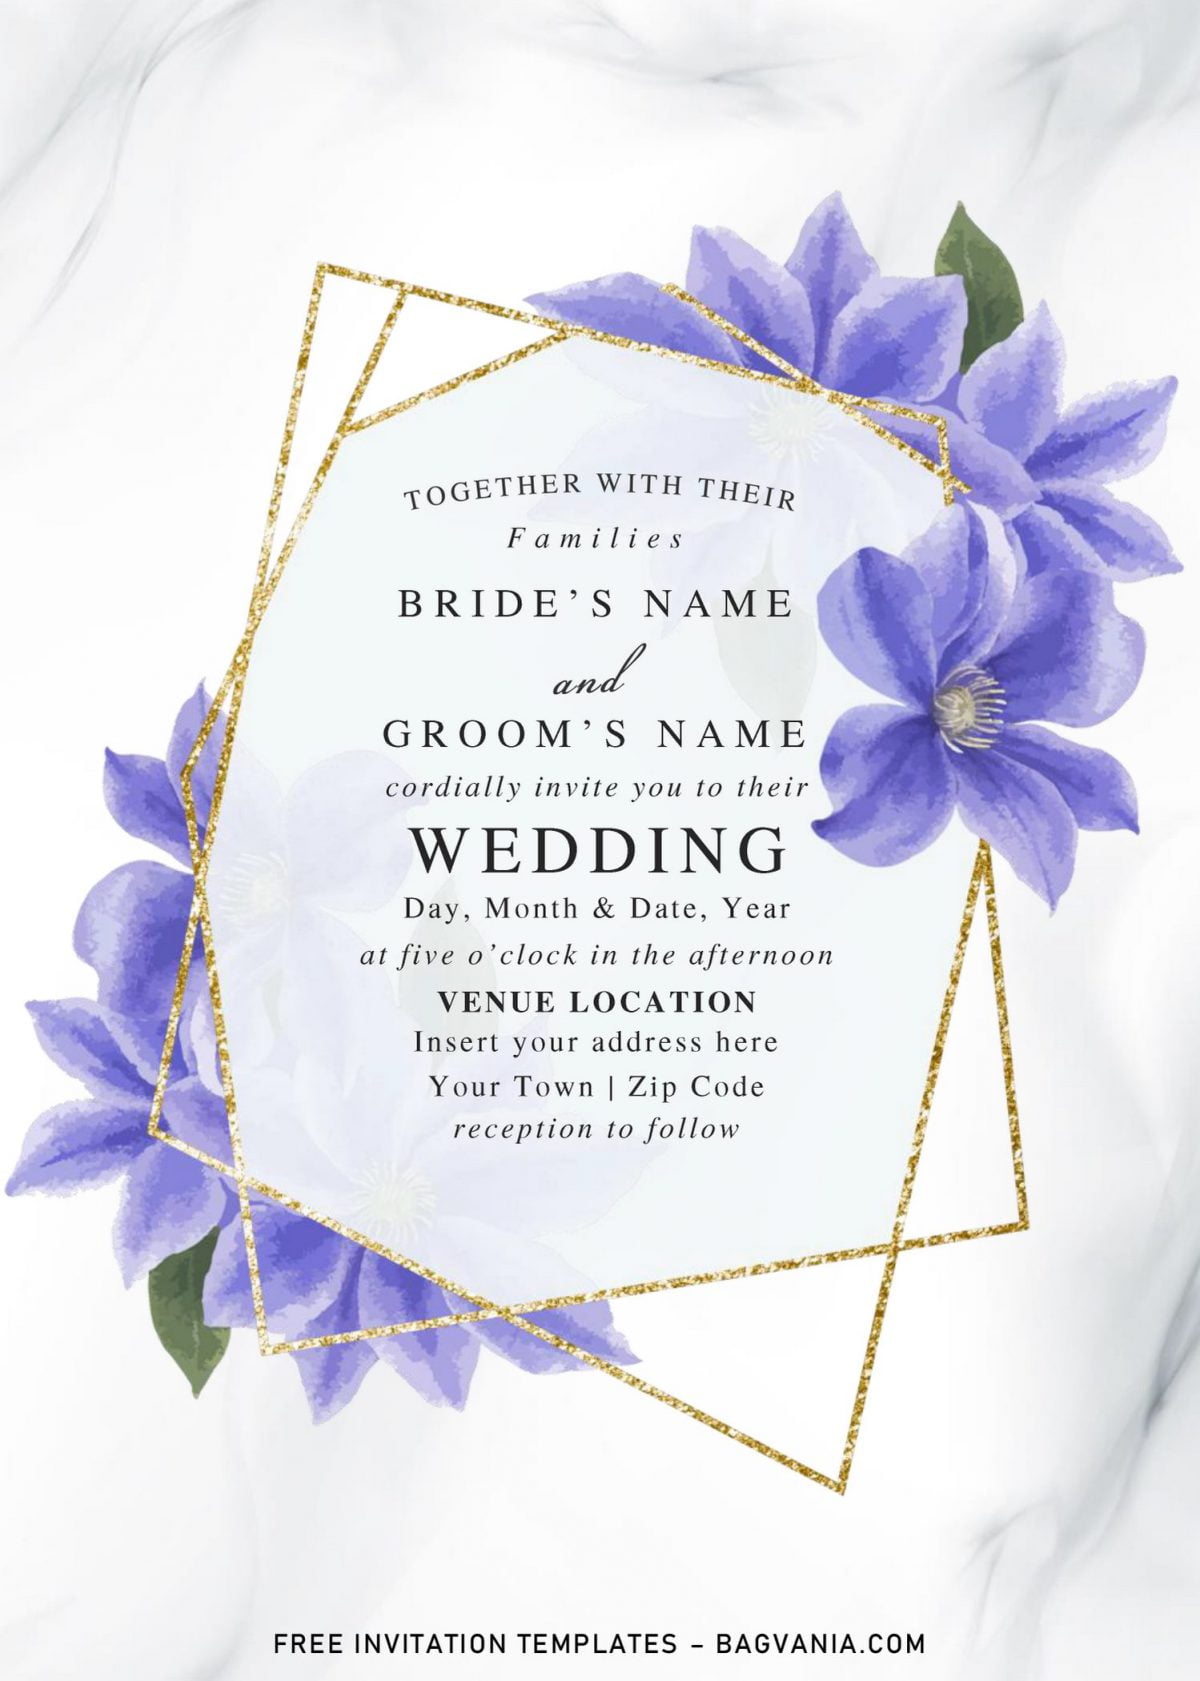 Free Blue Floral And Gold Geometric Wedding Invitation Templates For Word and has sparkling Gold glitter text frame